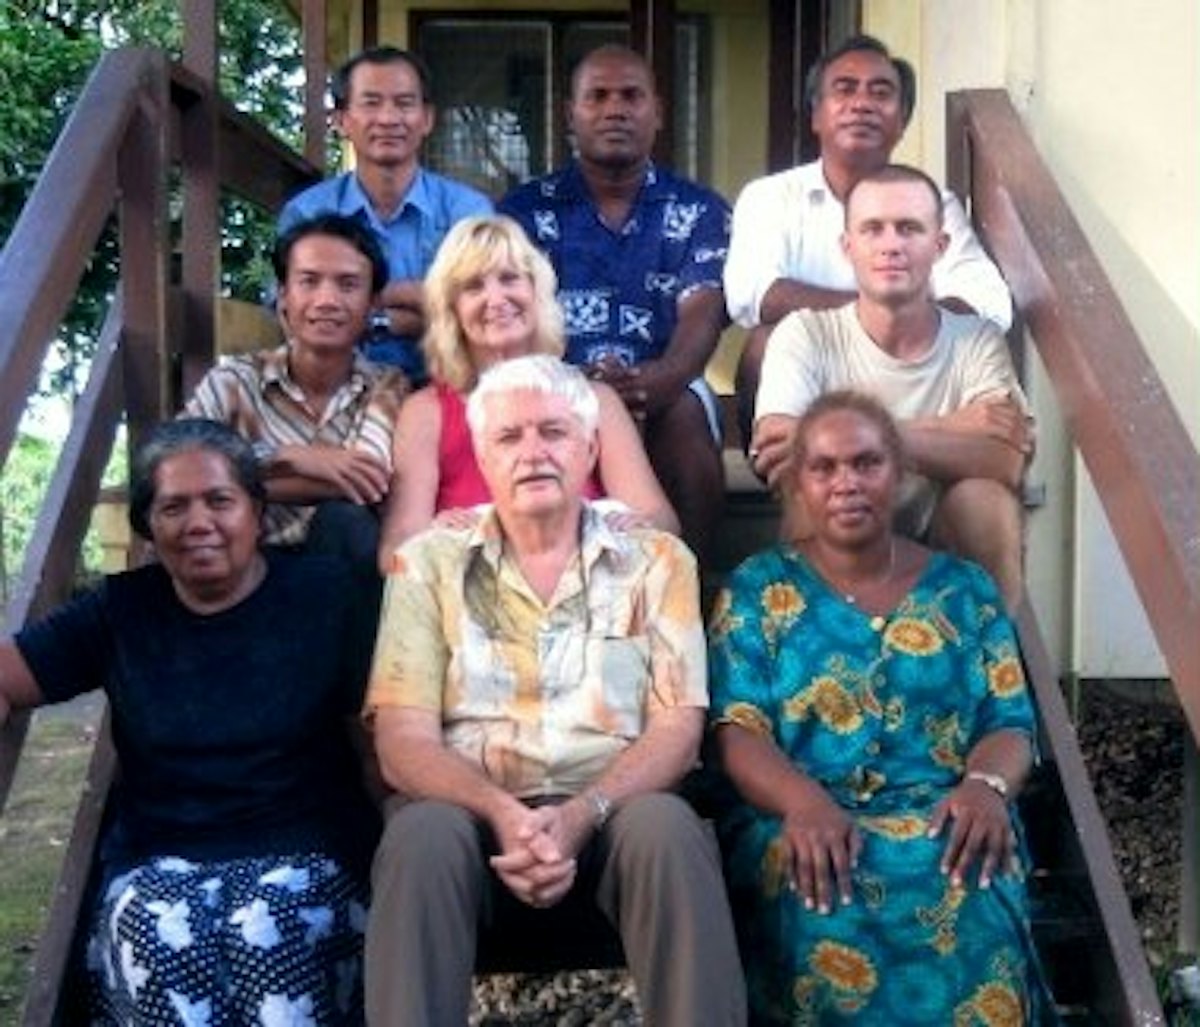 The new National Assembly of the Baha'is of the Solomon Islands, shown here, was elected at the annual convention held in late April 2007 in Gizo, near villages devastated by a recent earthquake and tsunami.